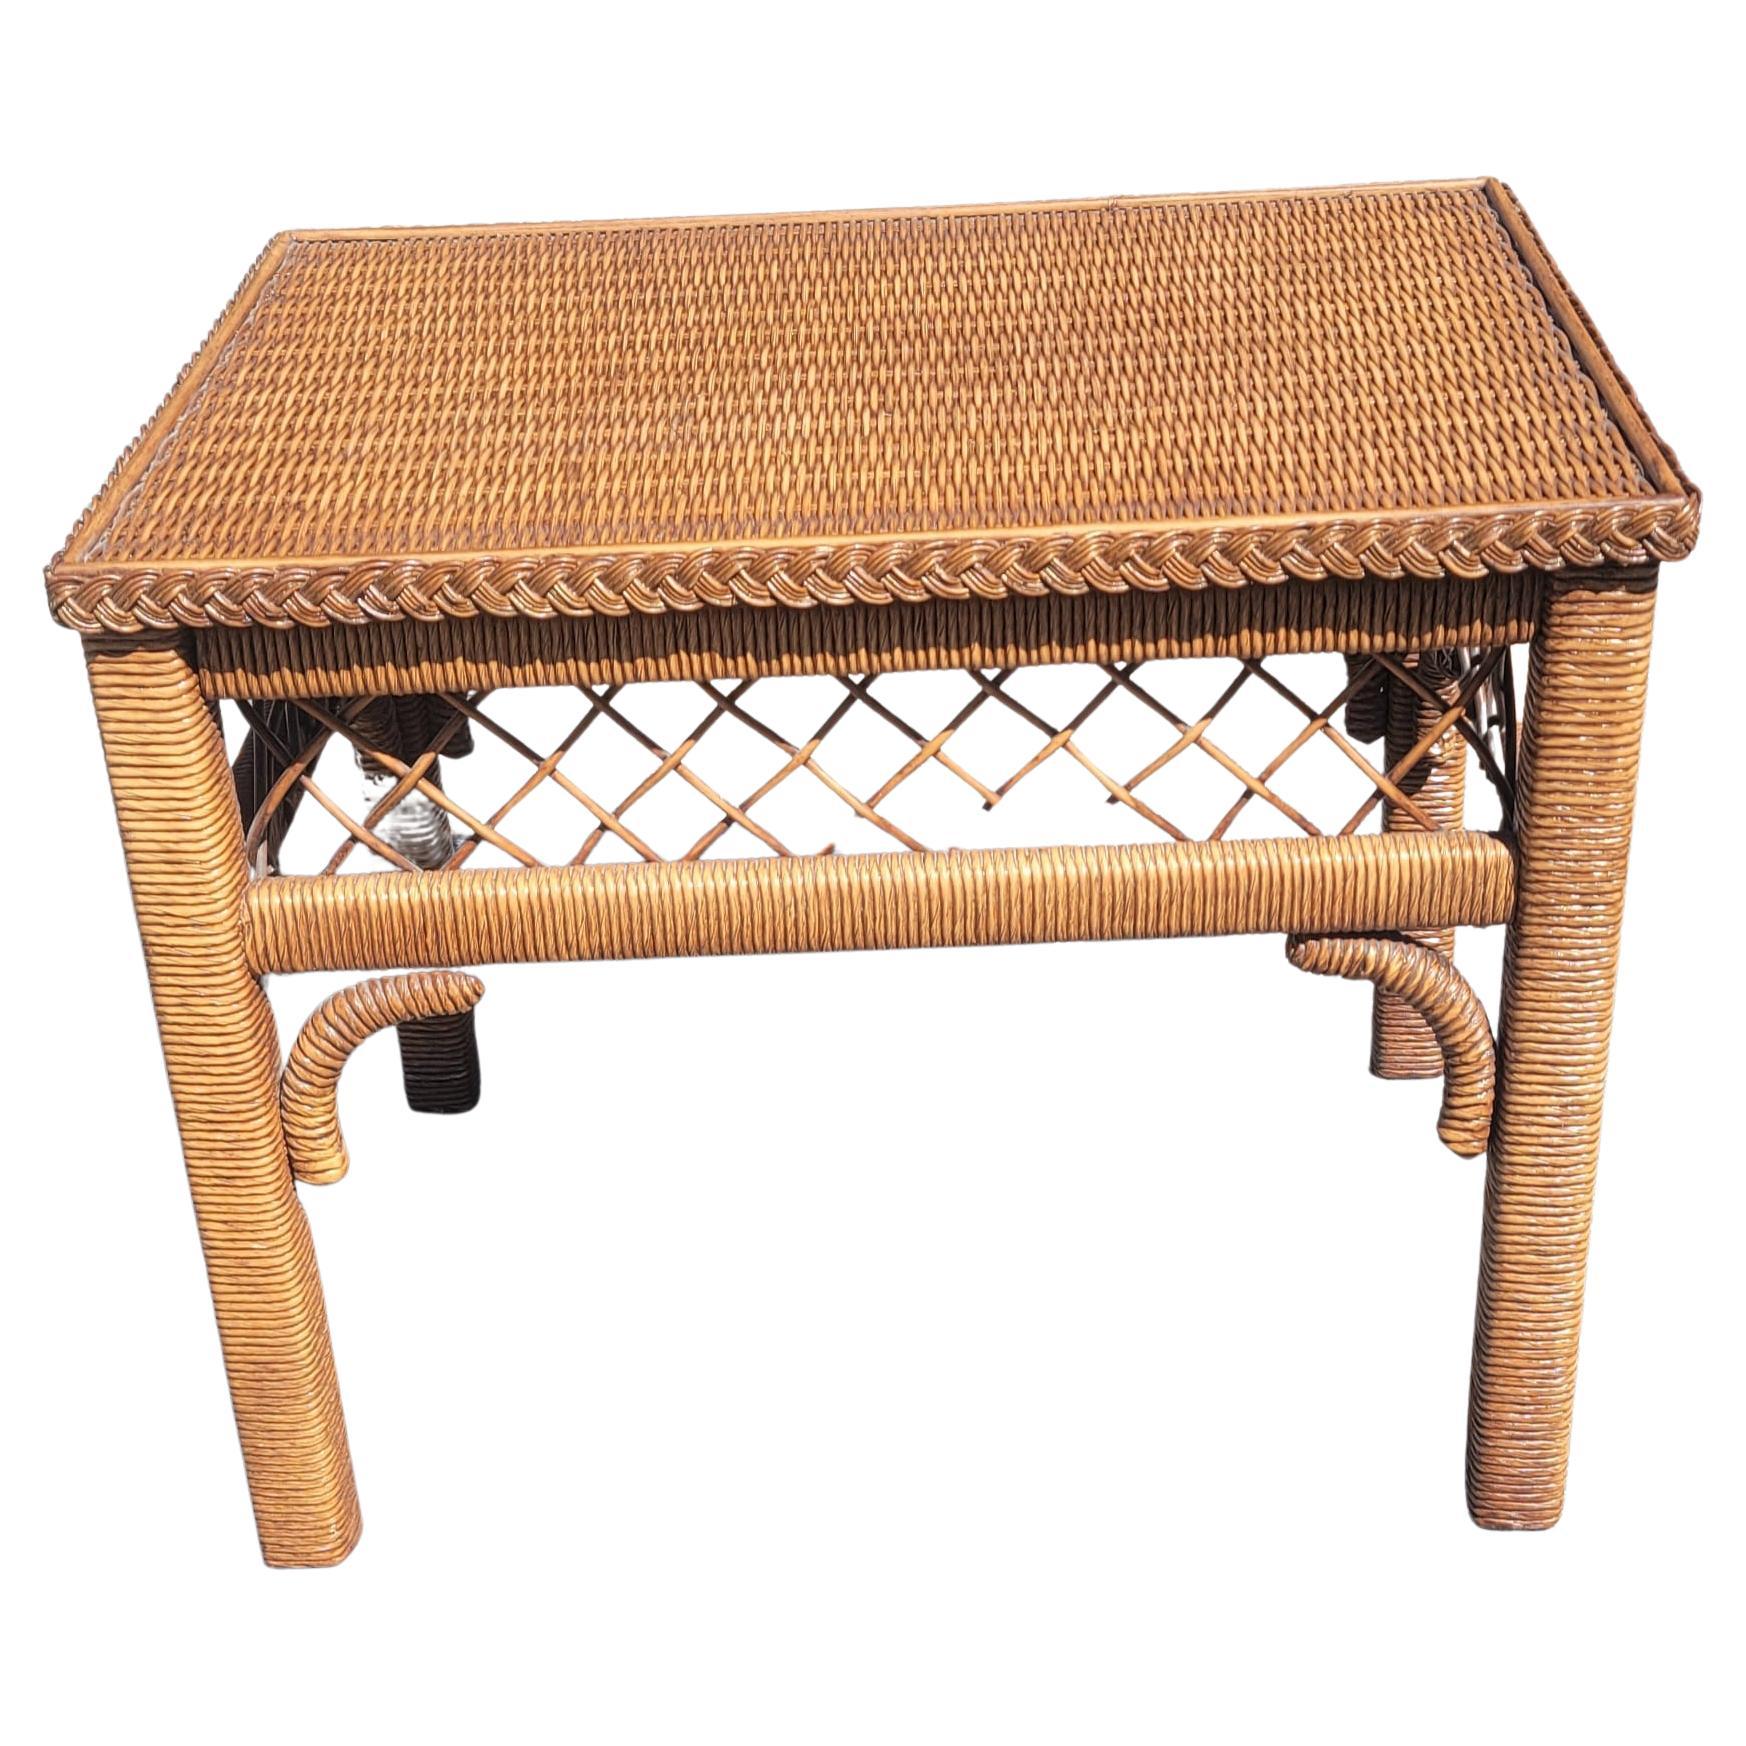 Gorgeous bohemian style rectangular side table by Henry link. 
Table features woven wicker and rattan frame with a glass top and measures 19